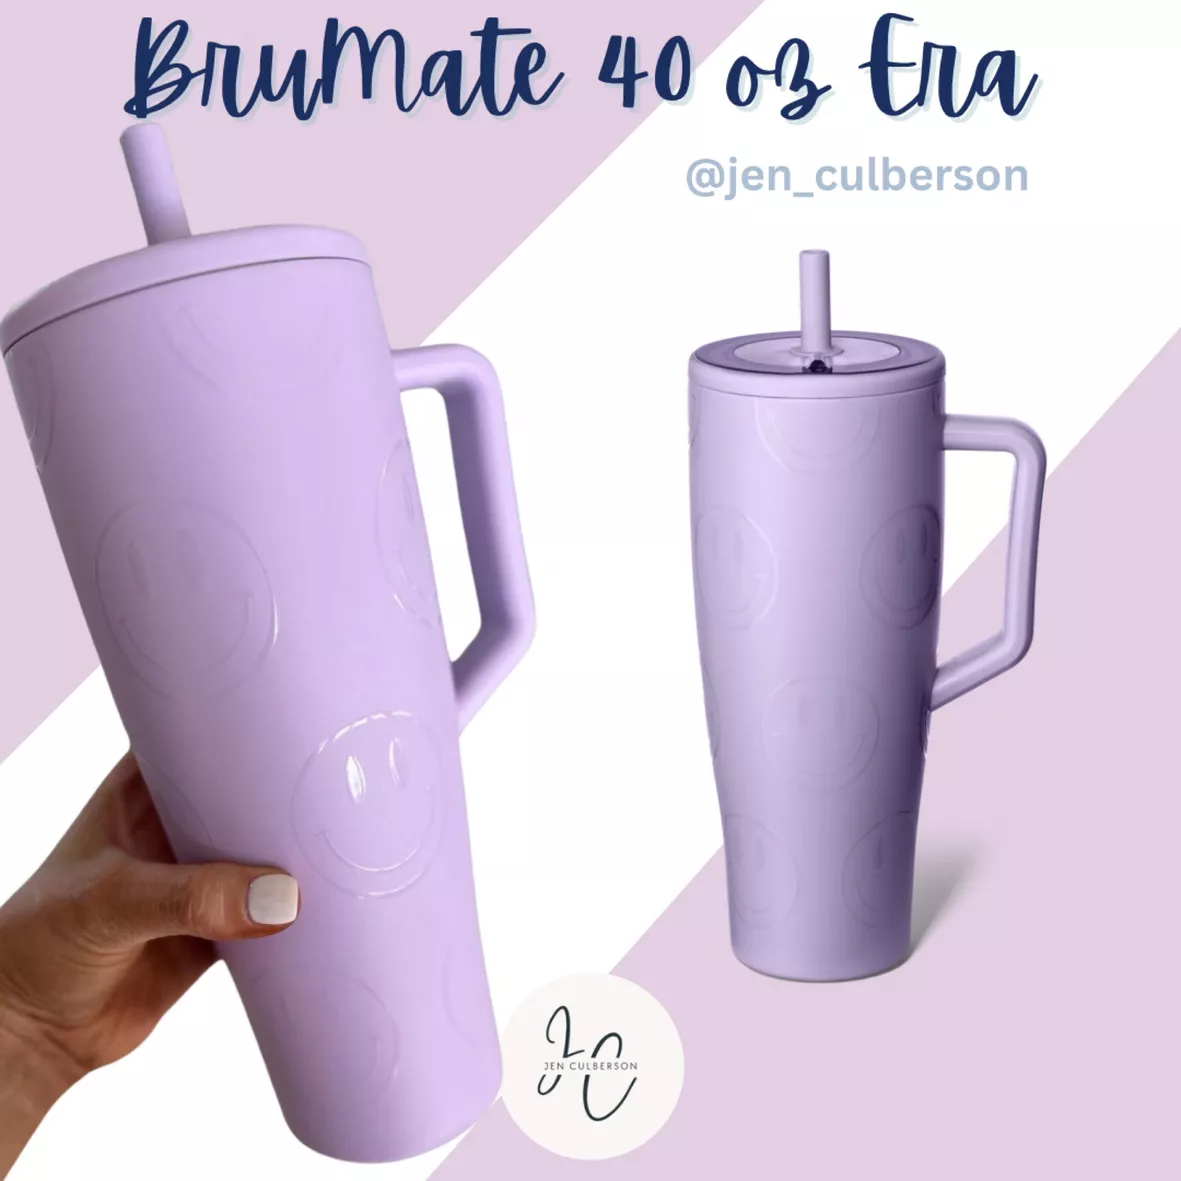 It's finally here! Introducing the Era Leakproof Straw Tumbler